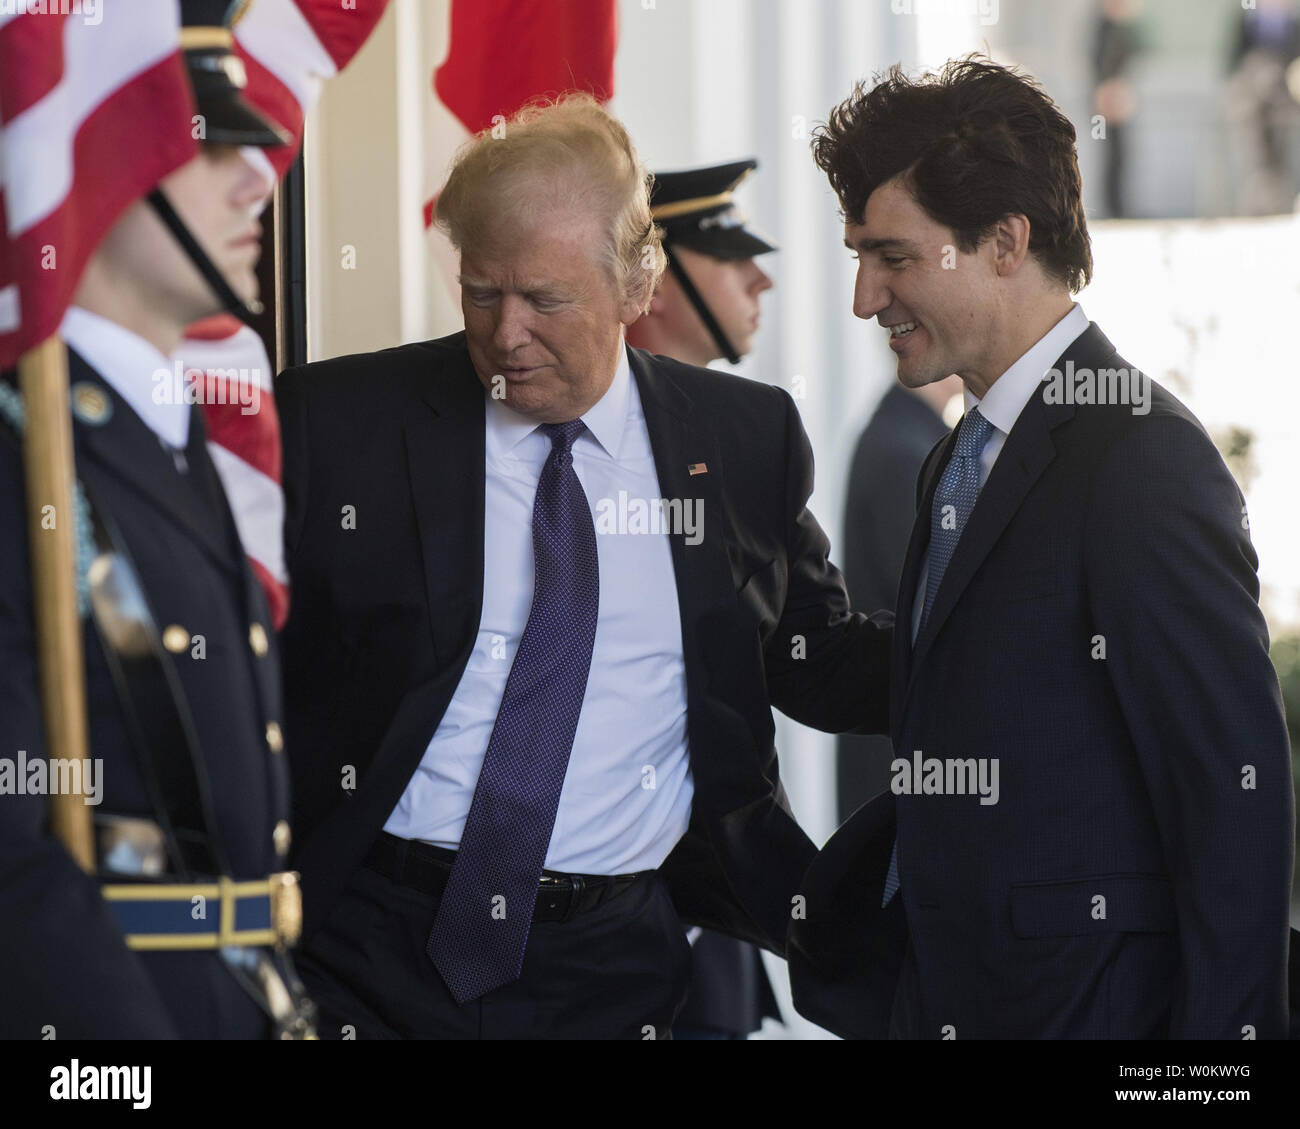 U.S. President Donald Trump greets Canada's Prime Minister Justin Trudeau on a windy day to the West Wing of the White House in Washington D.C. on February 13, 2017. The two leaders will have meetings and a press conference later in the day.   Photo by Pat Benic/UPI Stock Photo